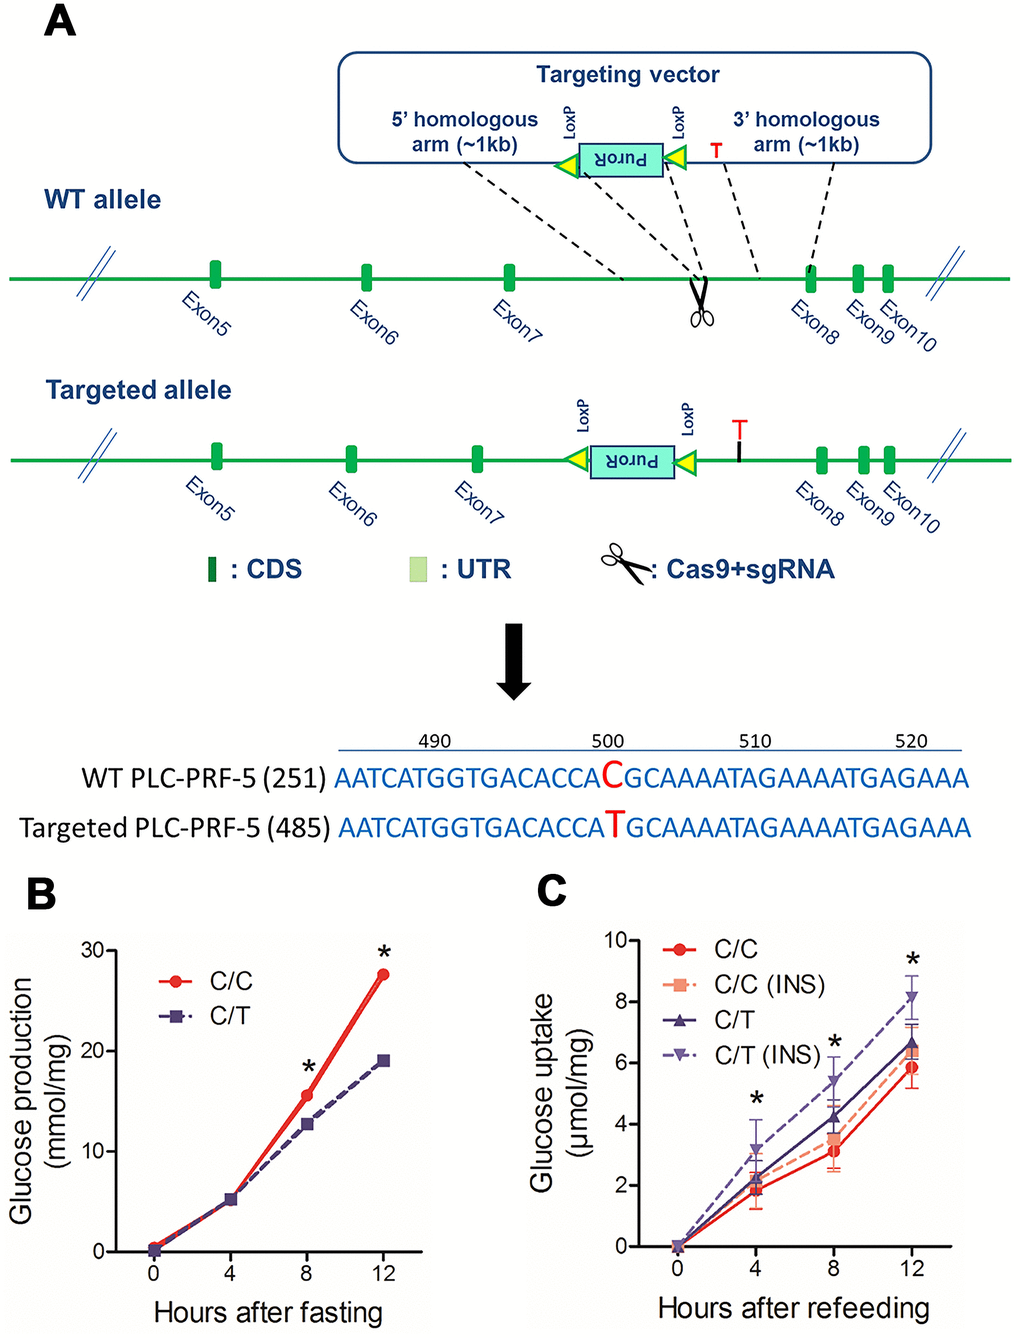 The rs290487 variant modulates glucose metabolism in PLC-PRF-5 cells. (A) Schematic diagram showing protocol for the generation of PLC-PRF-5 cell line with rs290487 C/T point mutation using the CRISPR/Cas9 knock-in approach. (B) Glucose production is significantly higher in C/C cells compared to the C/T cells under fasting states. (C) Flow cytometry results show reduced 2NBDG uptake in insulin-stimulated C/C cells compared to the C/T cells under serum-free and glucose-free conditions. *: PP